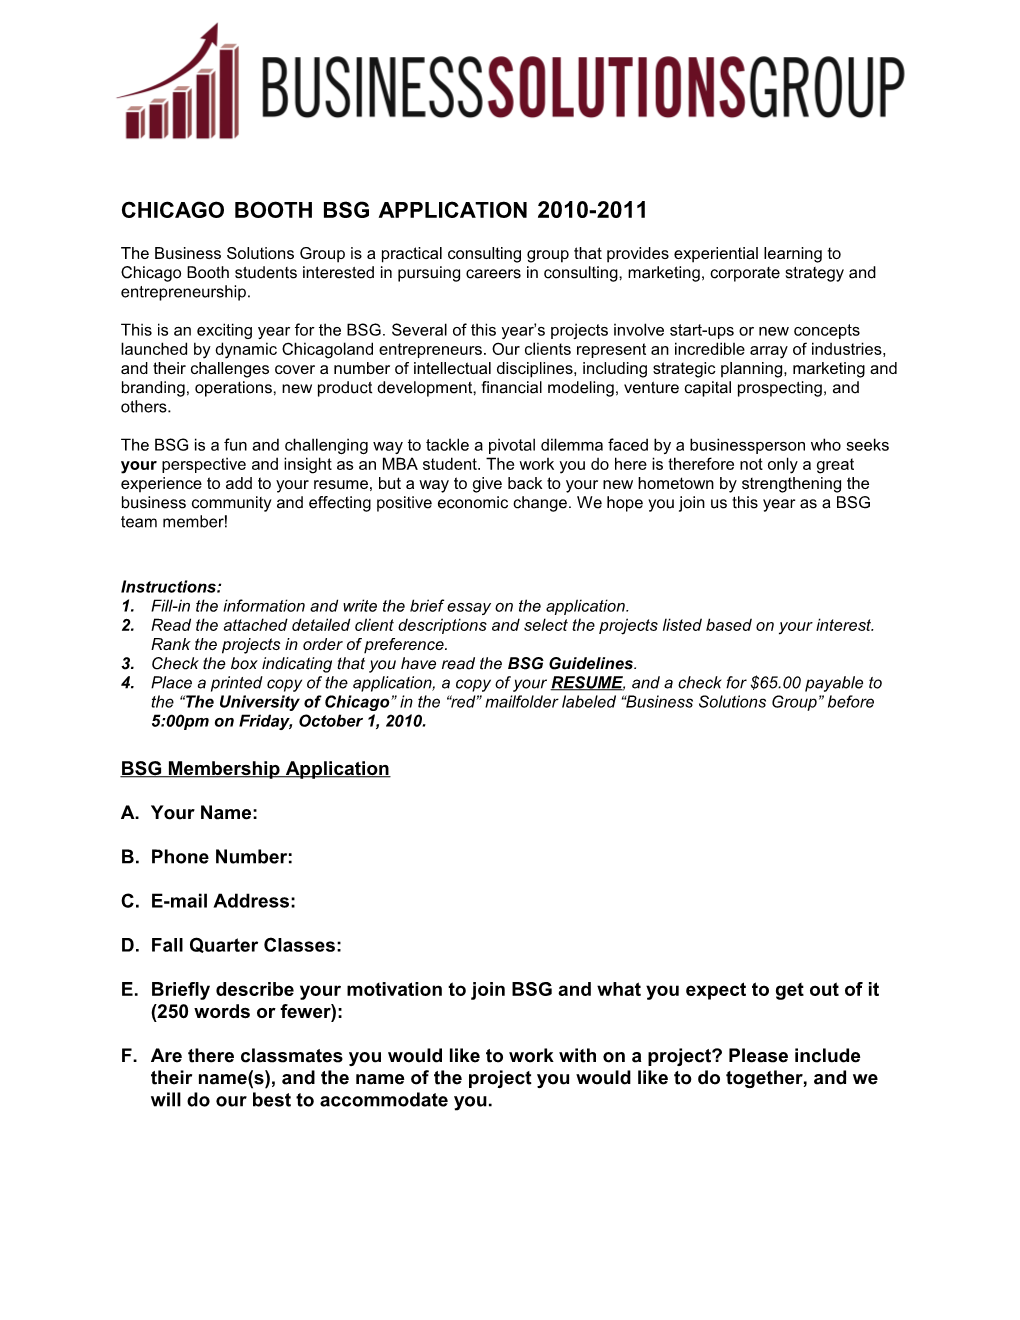 Chicago Booth Bsg Application 2010-2011